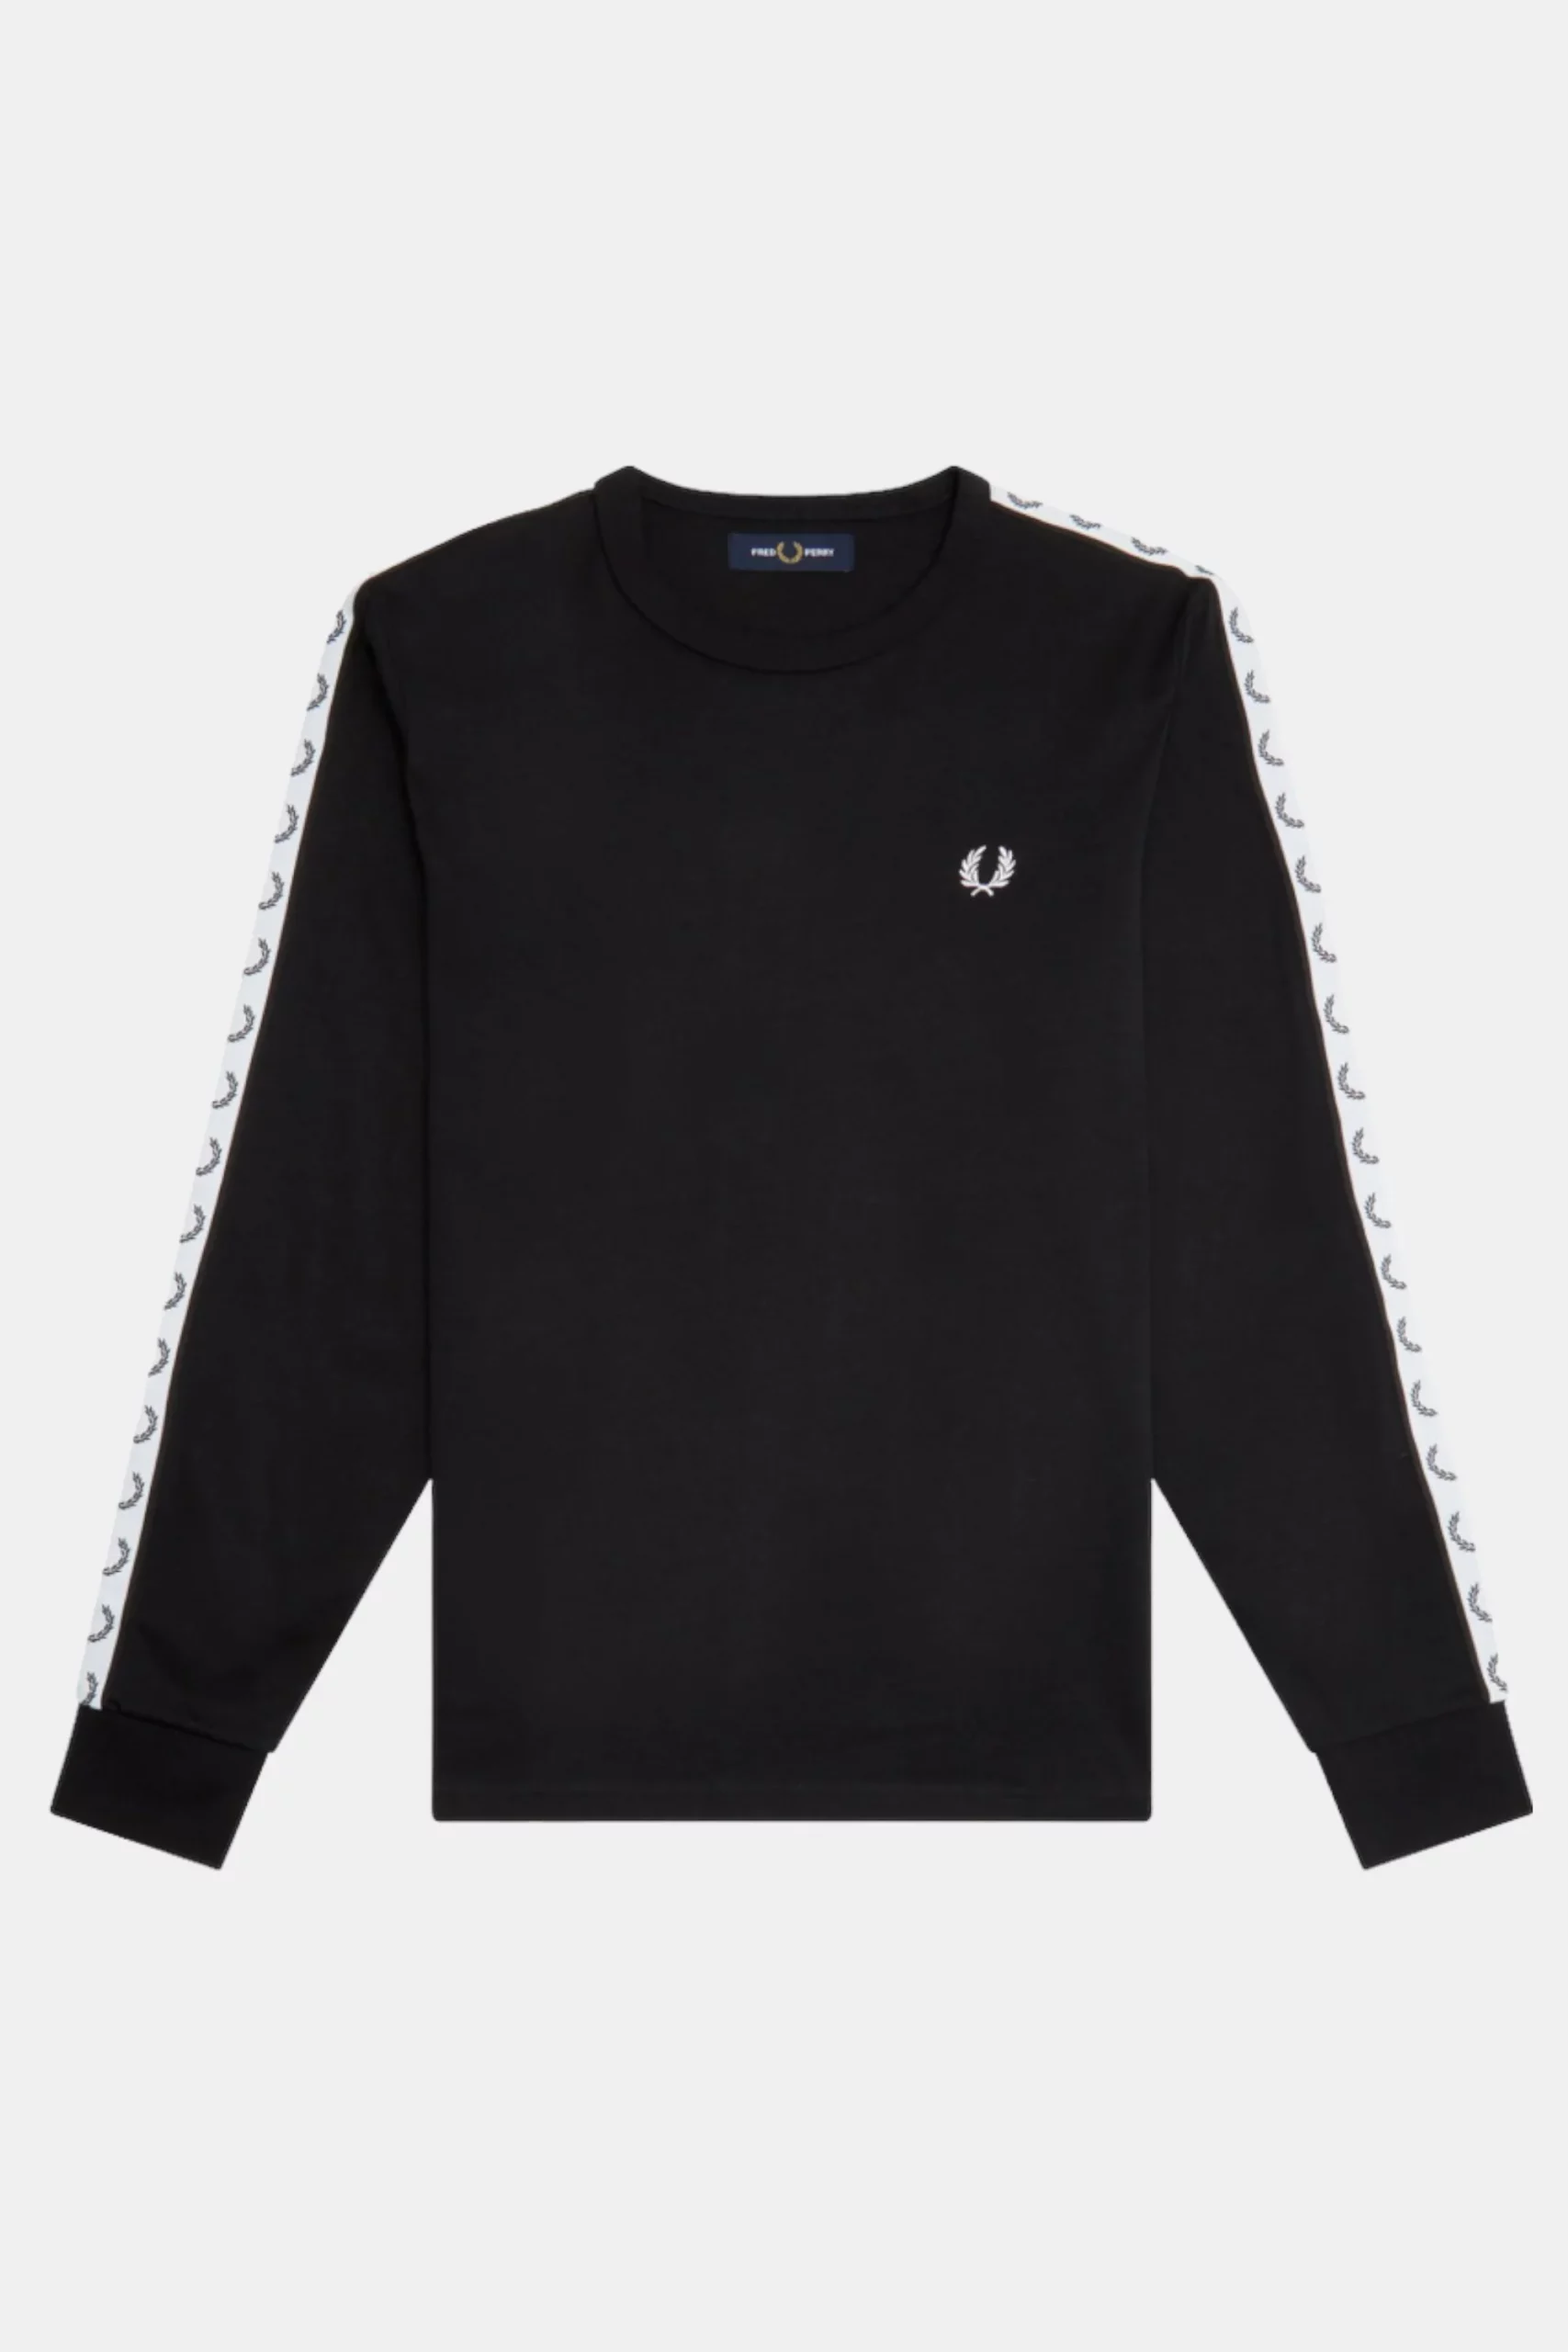 longsliv fred perry taped black 1